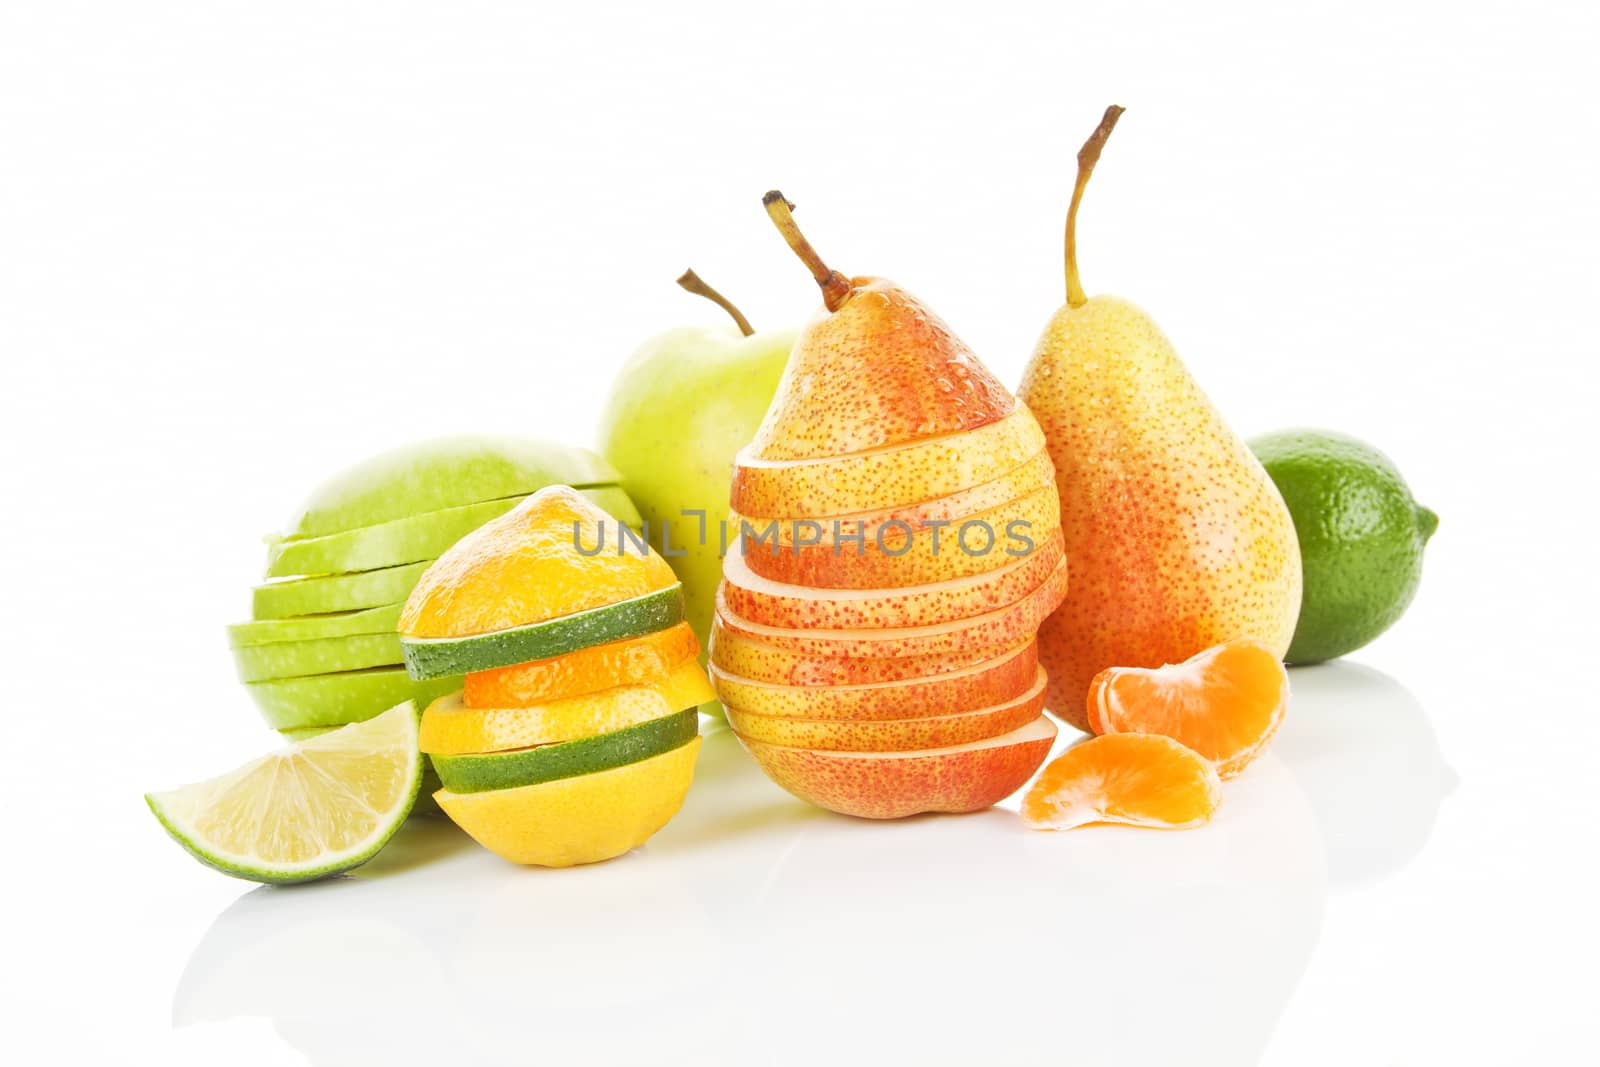 Colorful summer background. Apple, pear, lime and tangerine pieces, slices and whole fruit isolated.